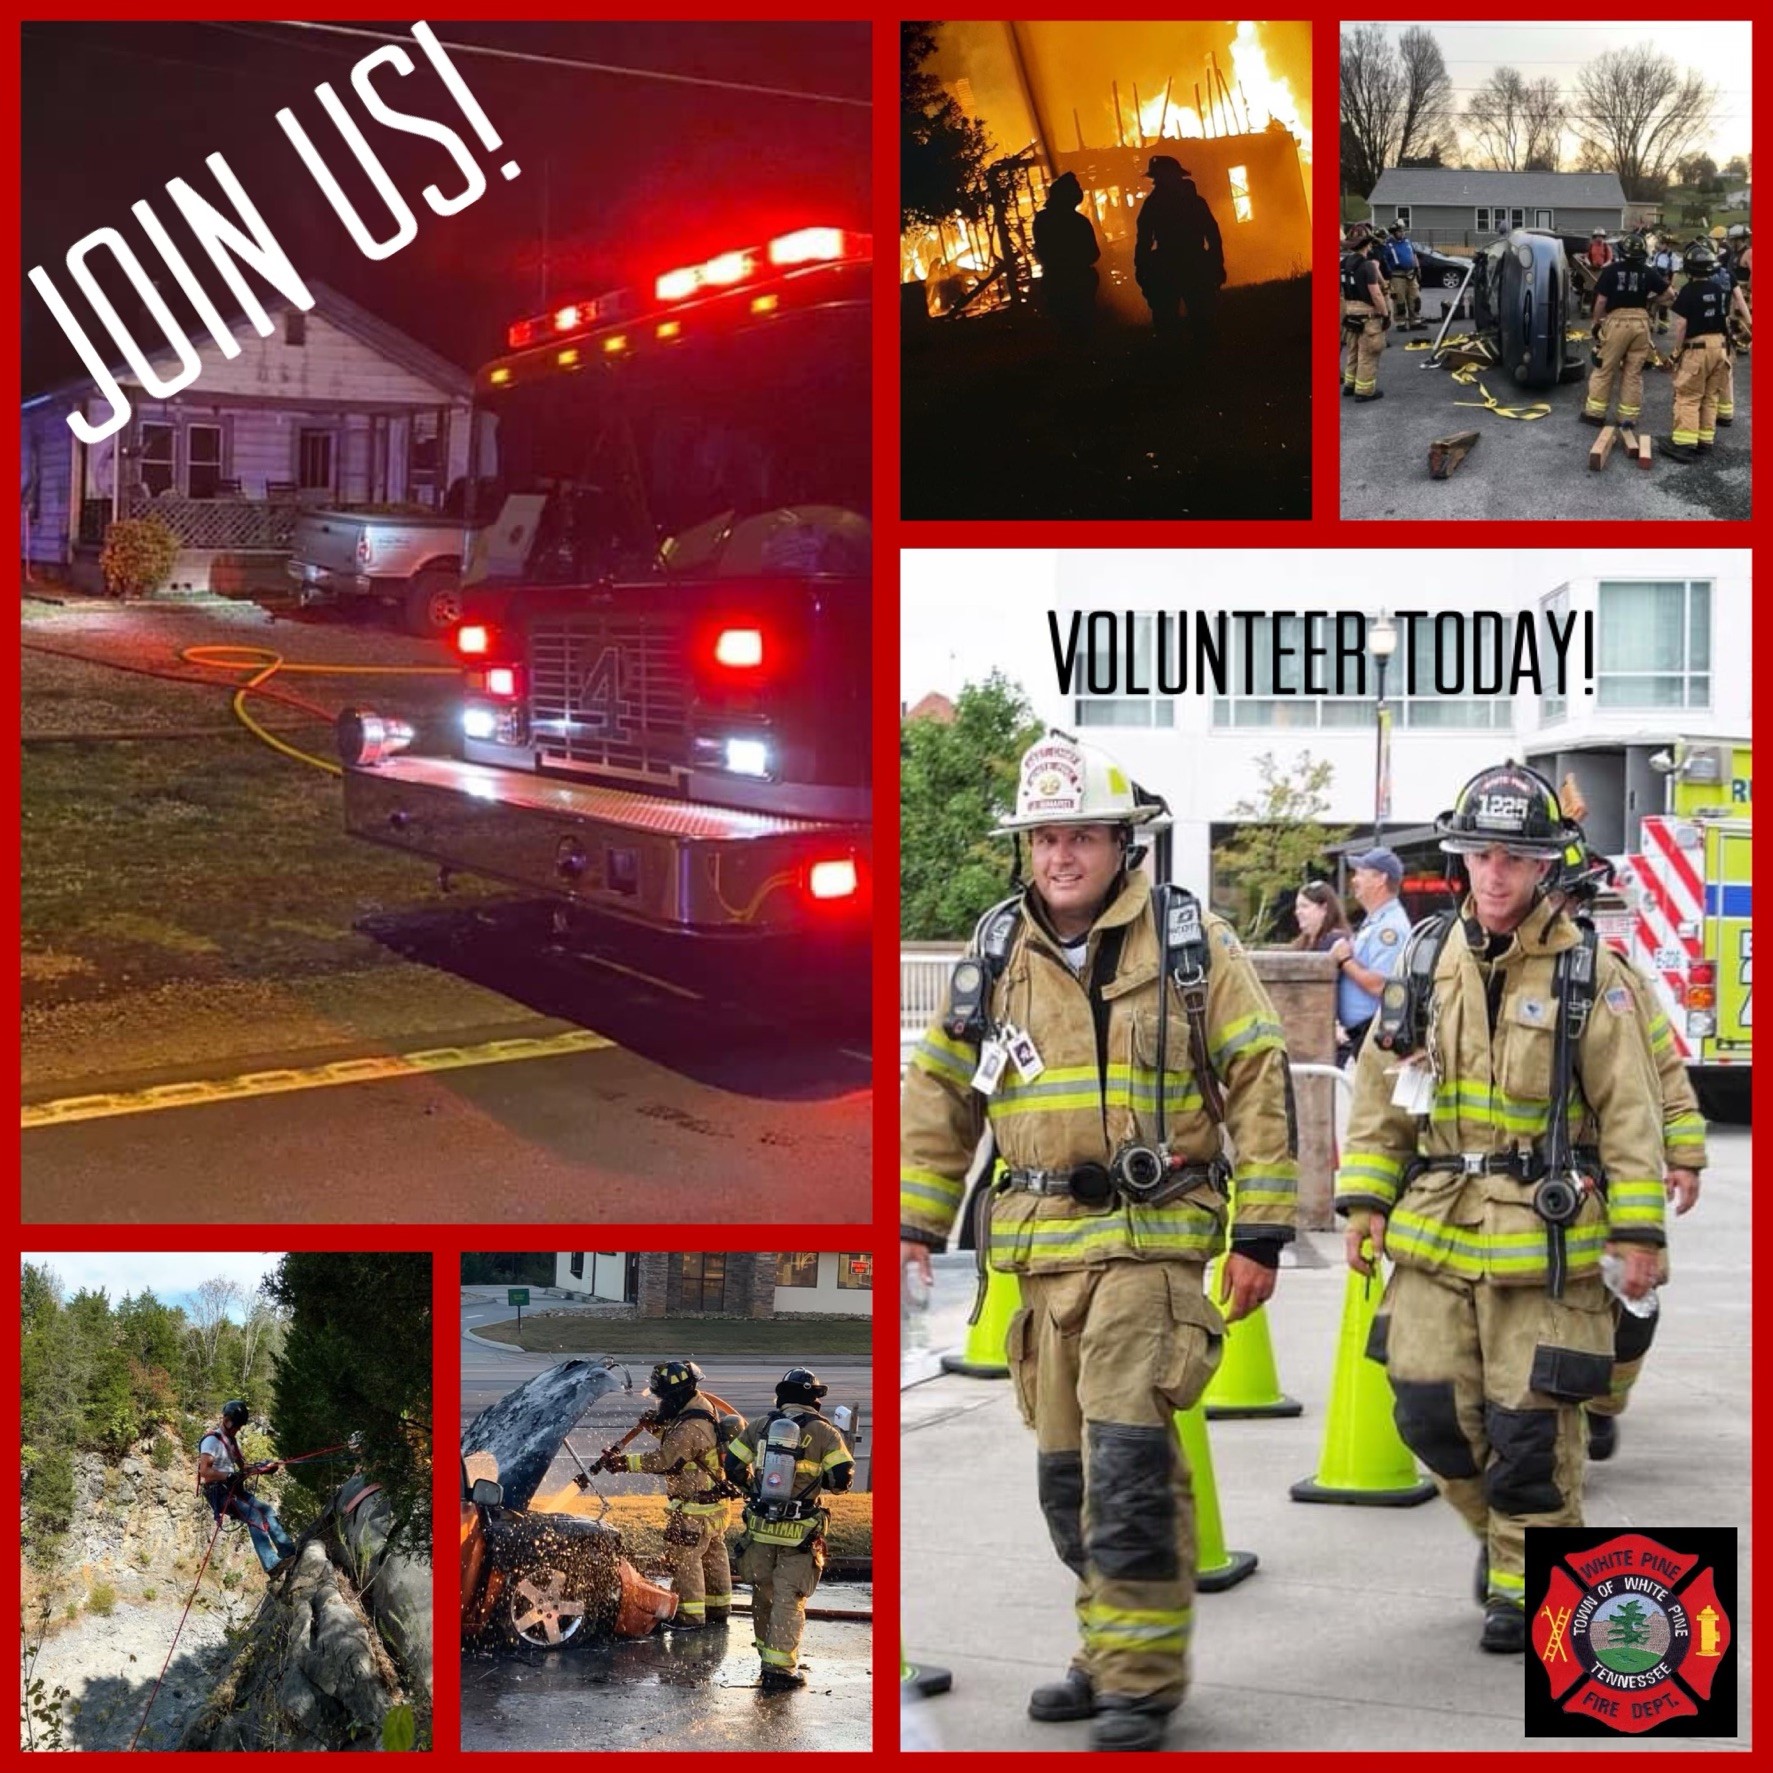 gallery of various photos of white pine fire department with the words "join Us" and "volunteer today" on it